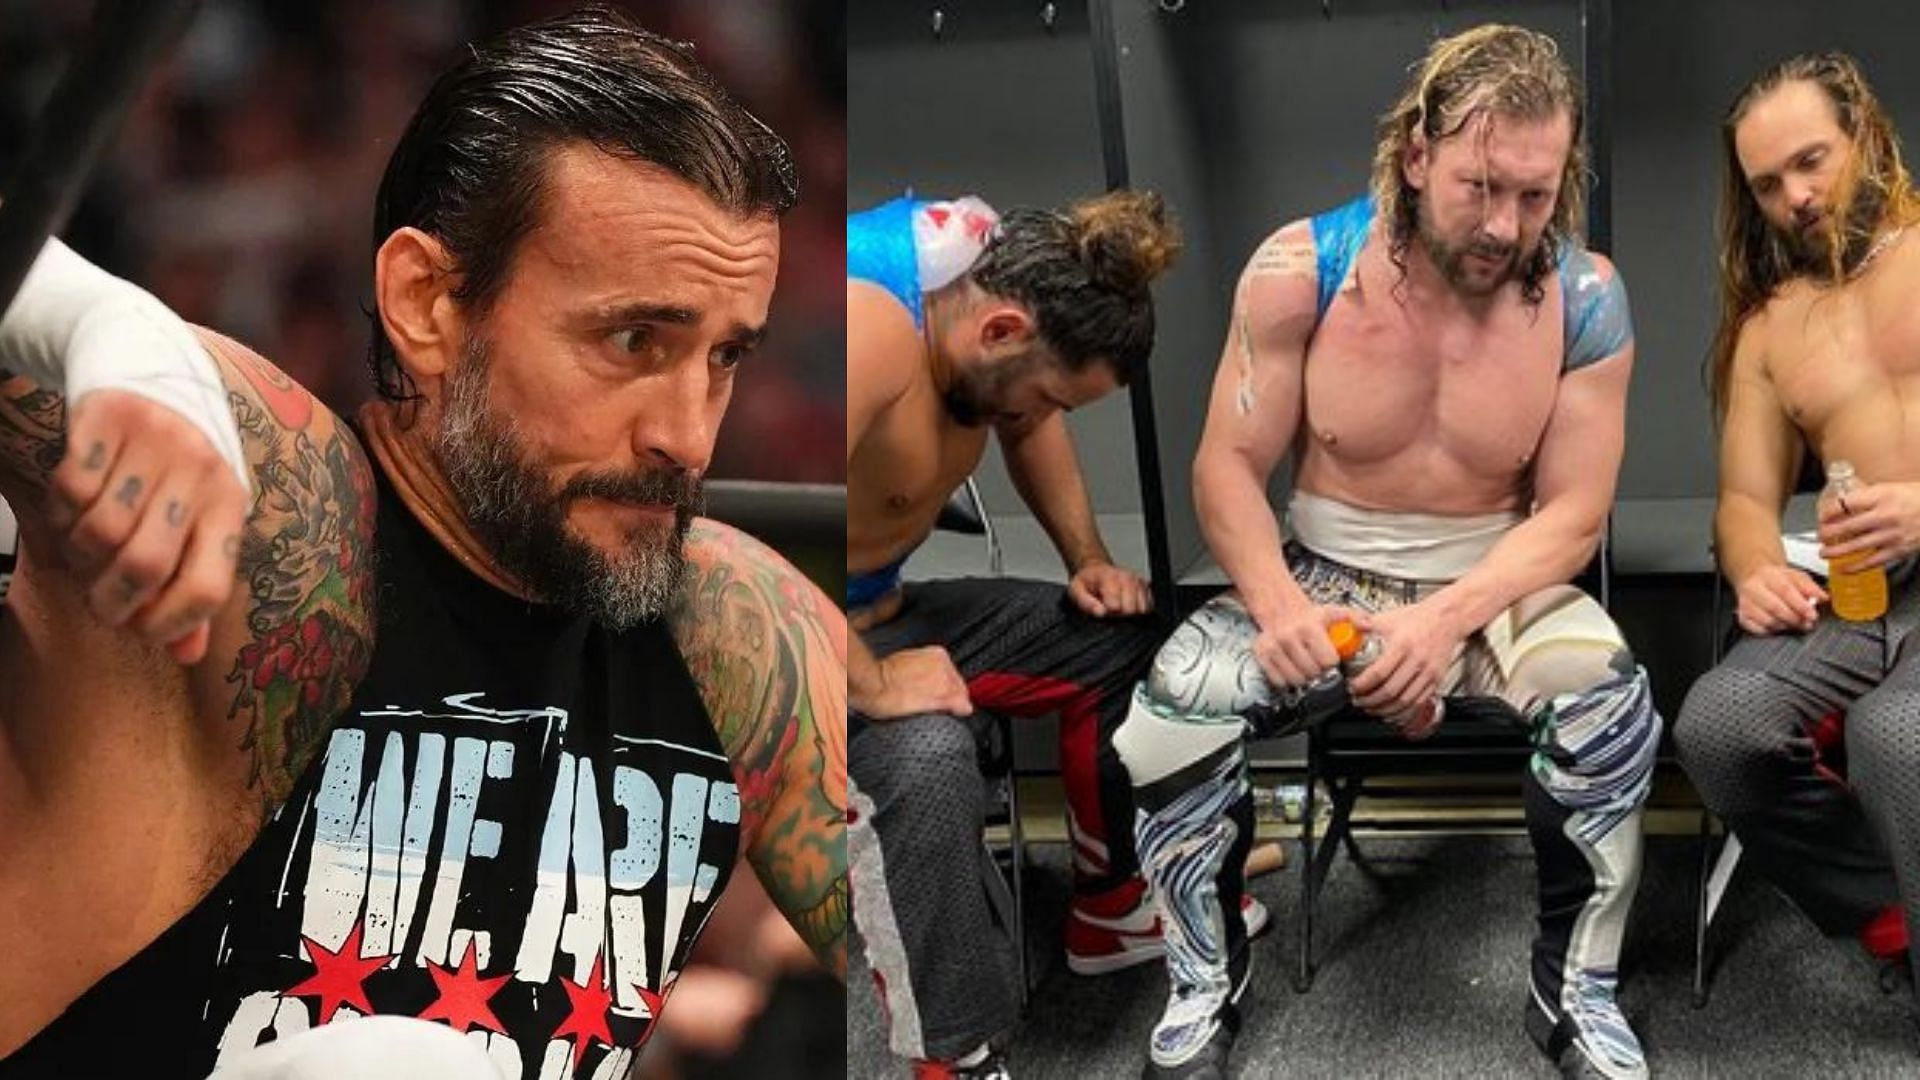 Twitter Explodes As Aew Star Cm Punk Is Spotted In Public For The First Time After The Backstage Scuffle With The Elite